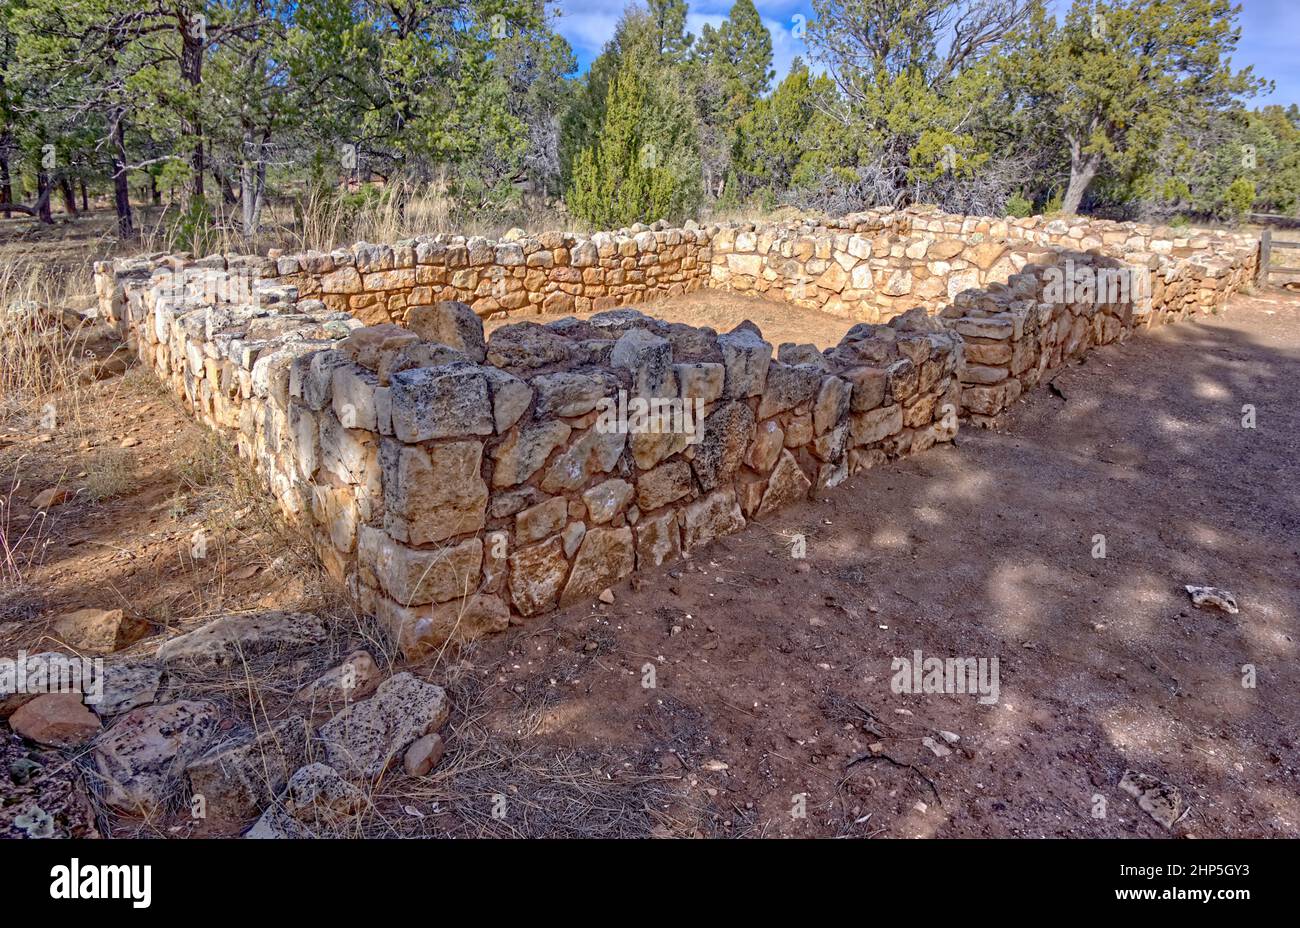 Sinagua Indian ruins near Walnut Canyon Arizona. These ruins are located just outside the actual canyon. The ruins are managed by the National Park Se Stock Photo